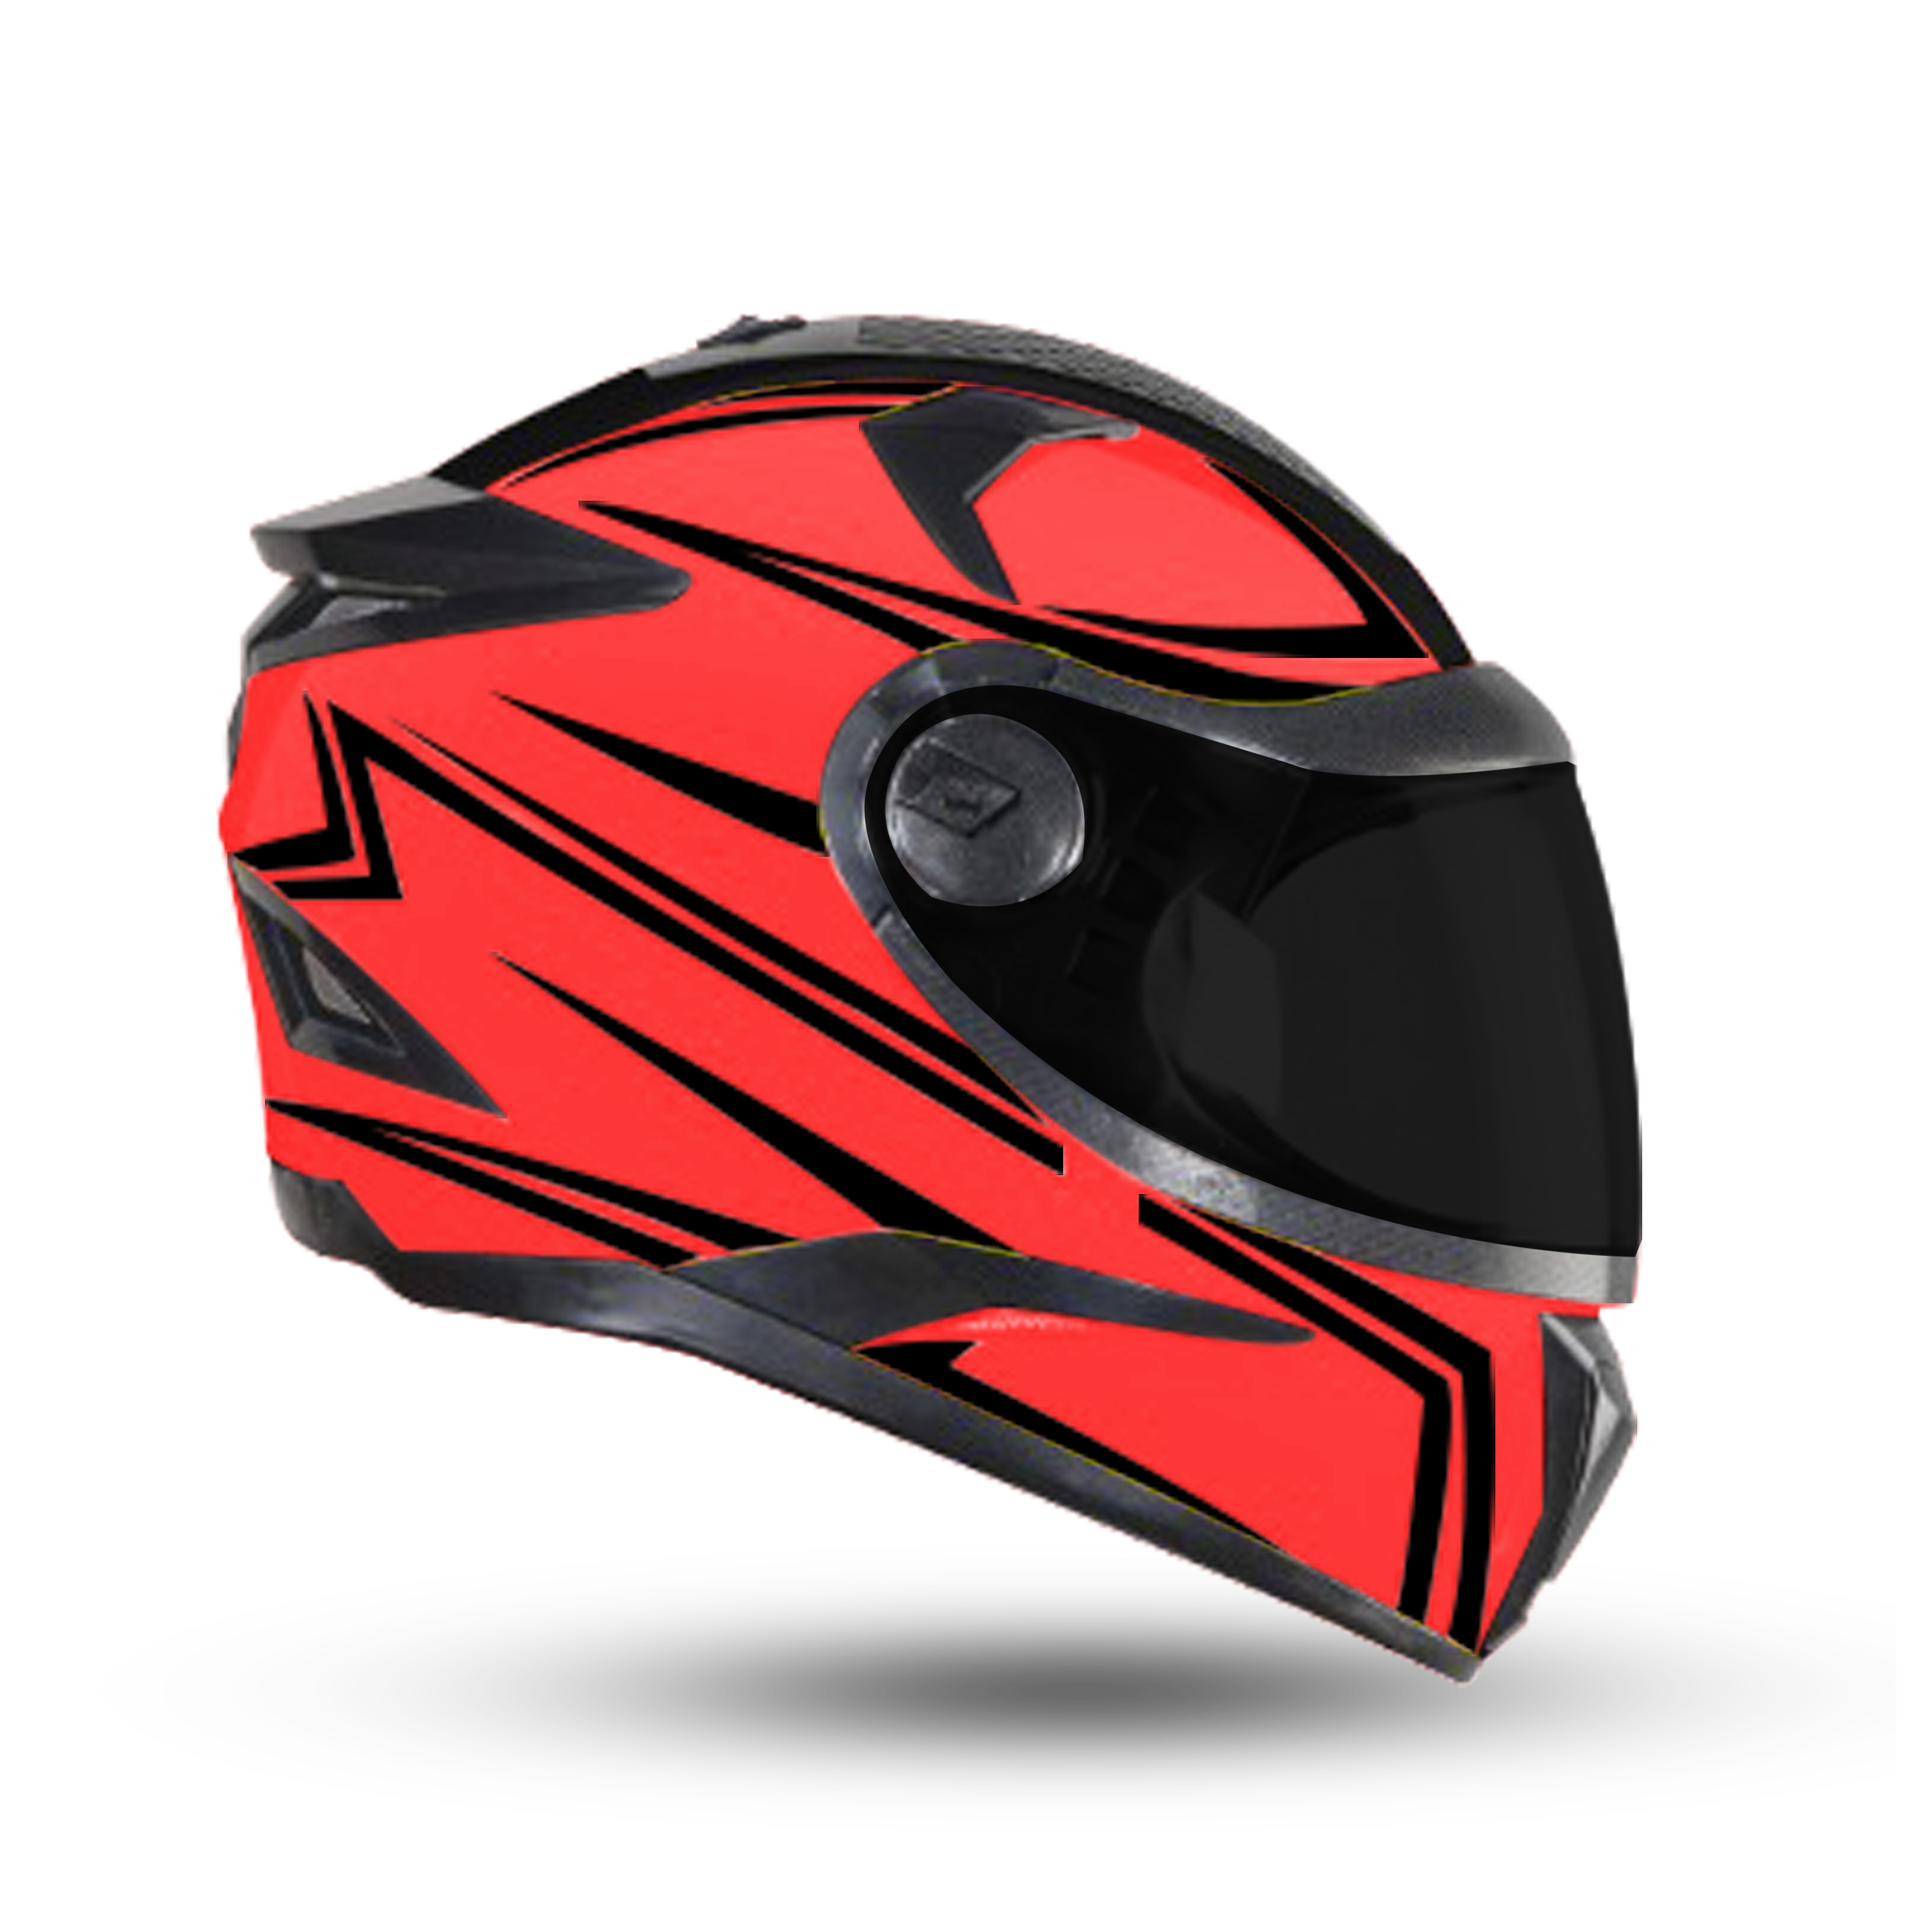 SBH-17 ROBOT REFLECTIVE GLOSSY FLUO WATERMELON (FITTED WITH CLEAR VISOR EXTRA SMOKE VISOR FREE)